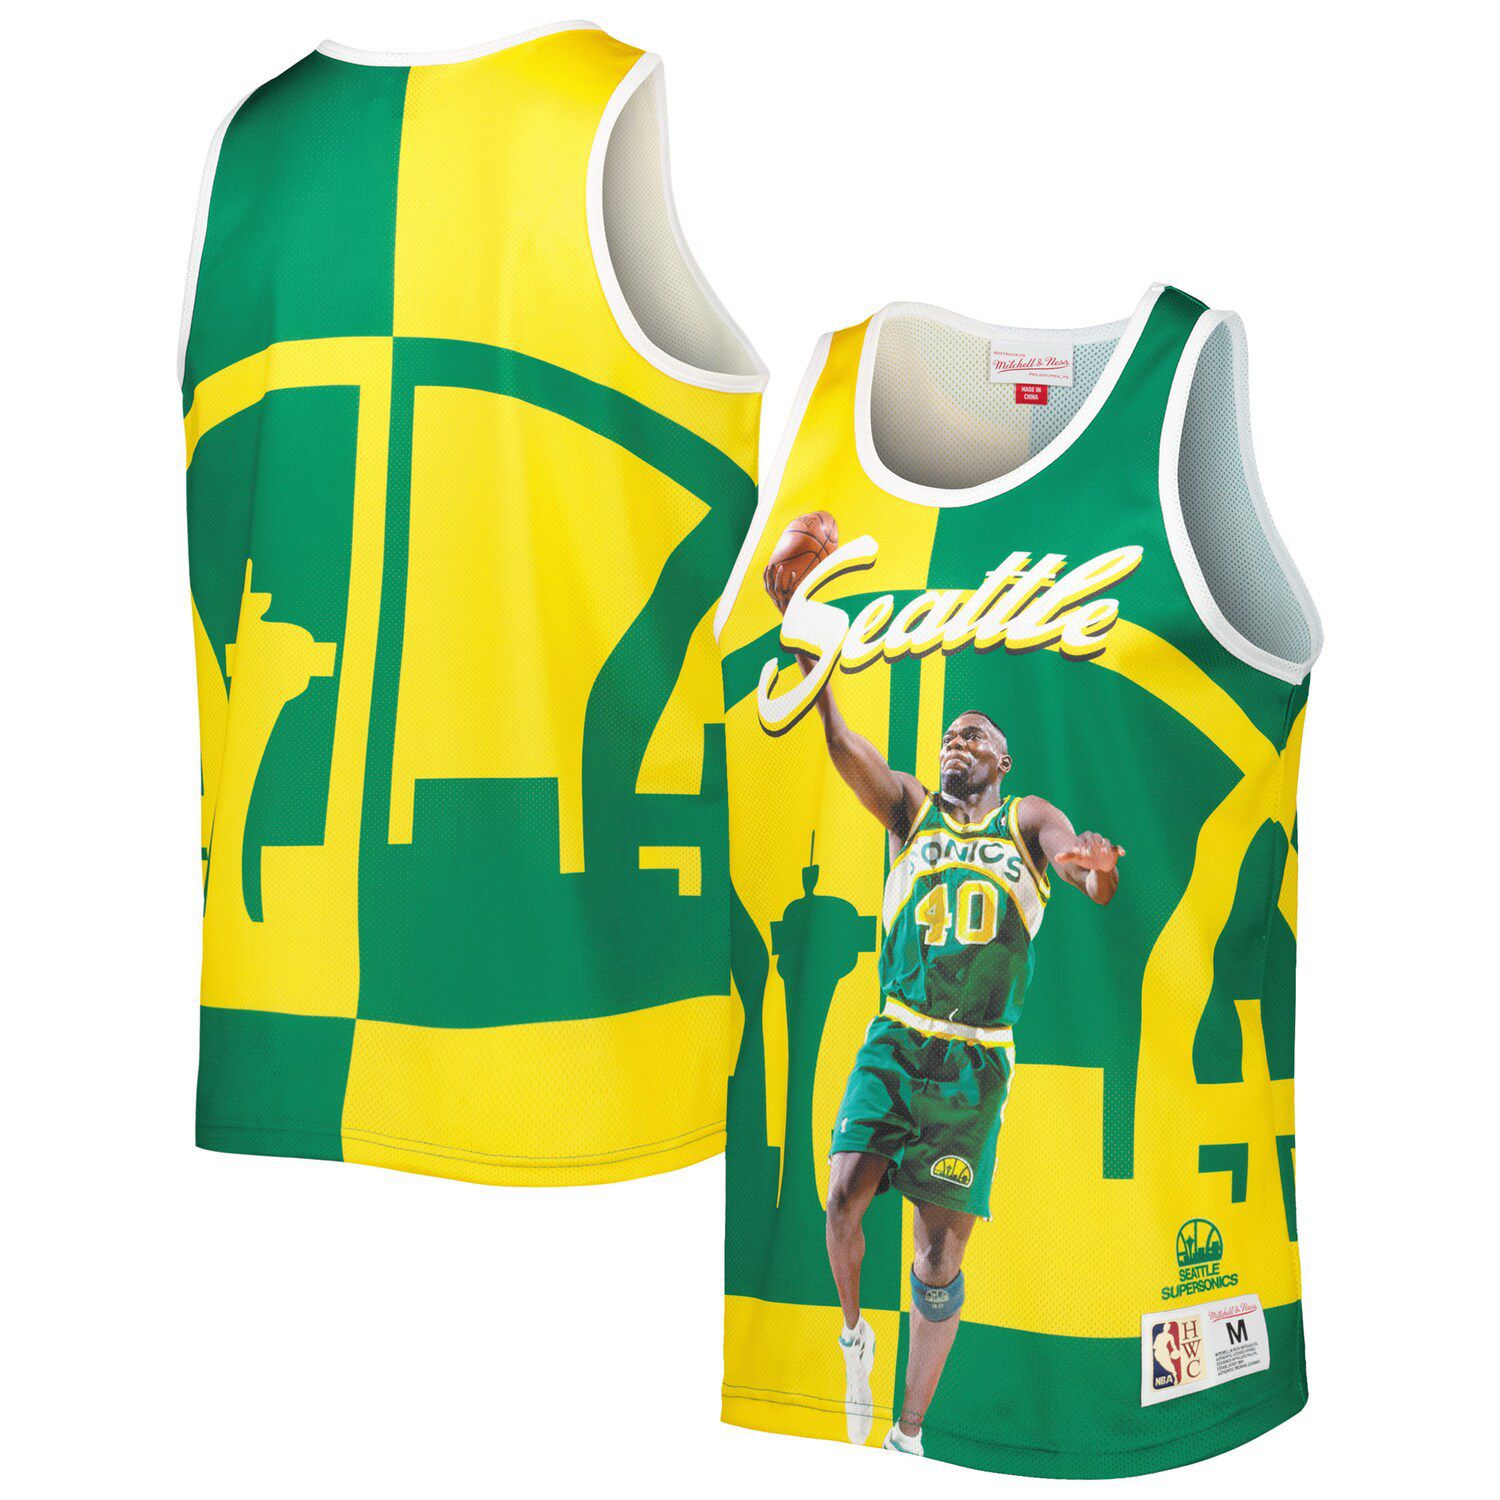 Seattle Sonics Ray Allen Jersey (Adult XL) - Excellent Condition